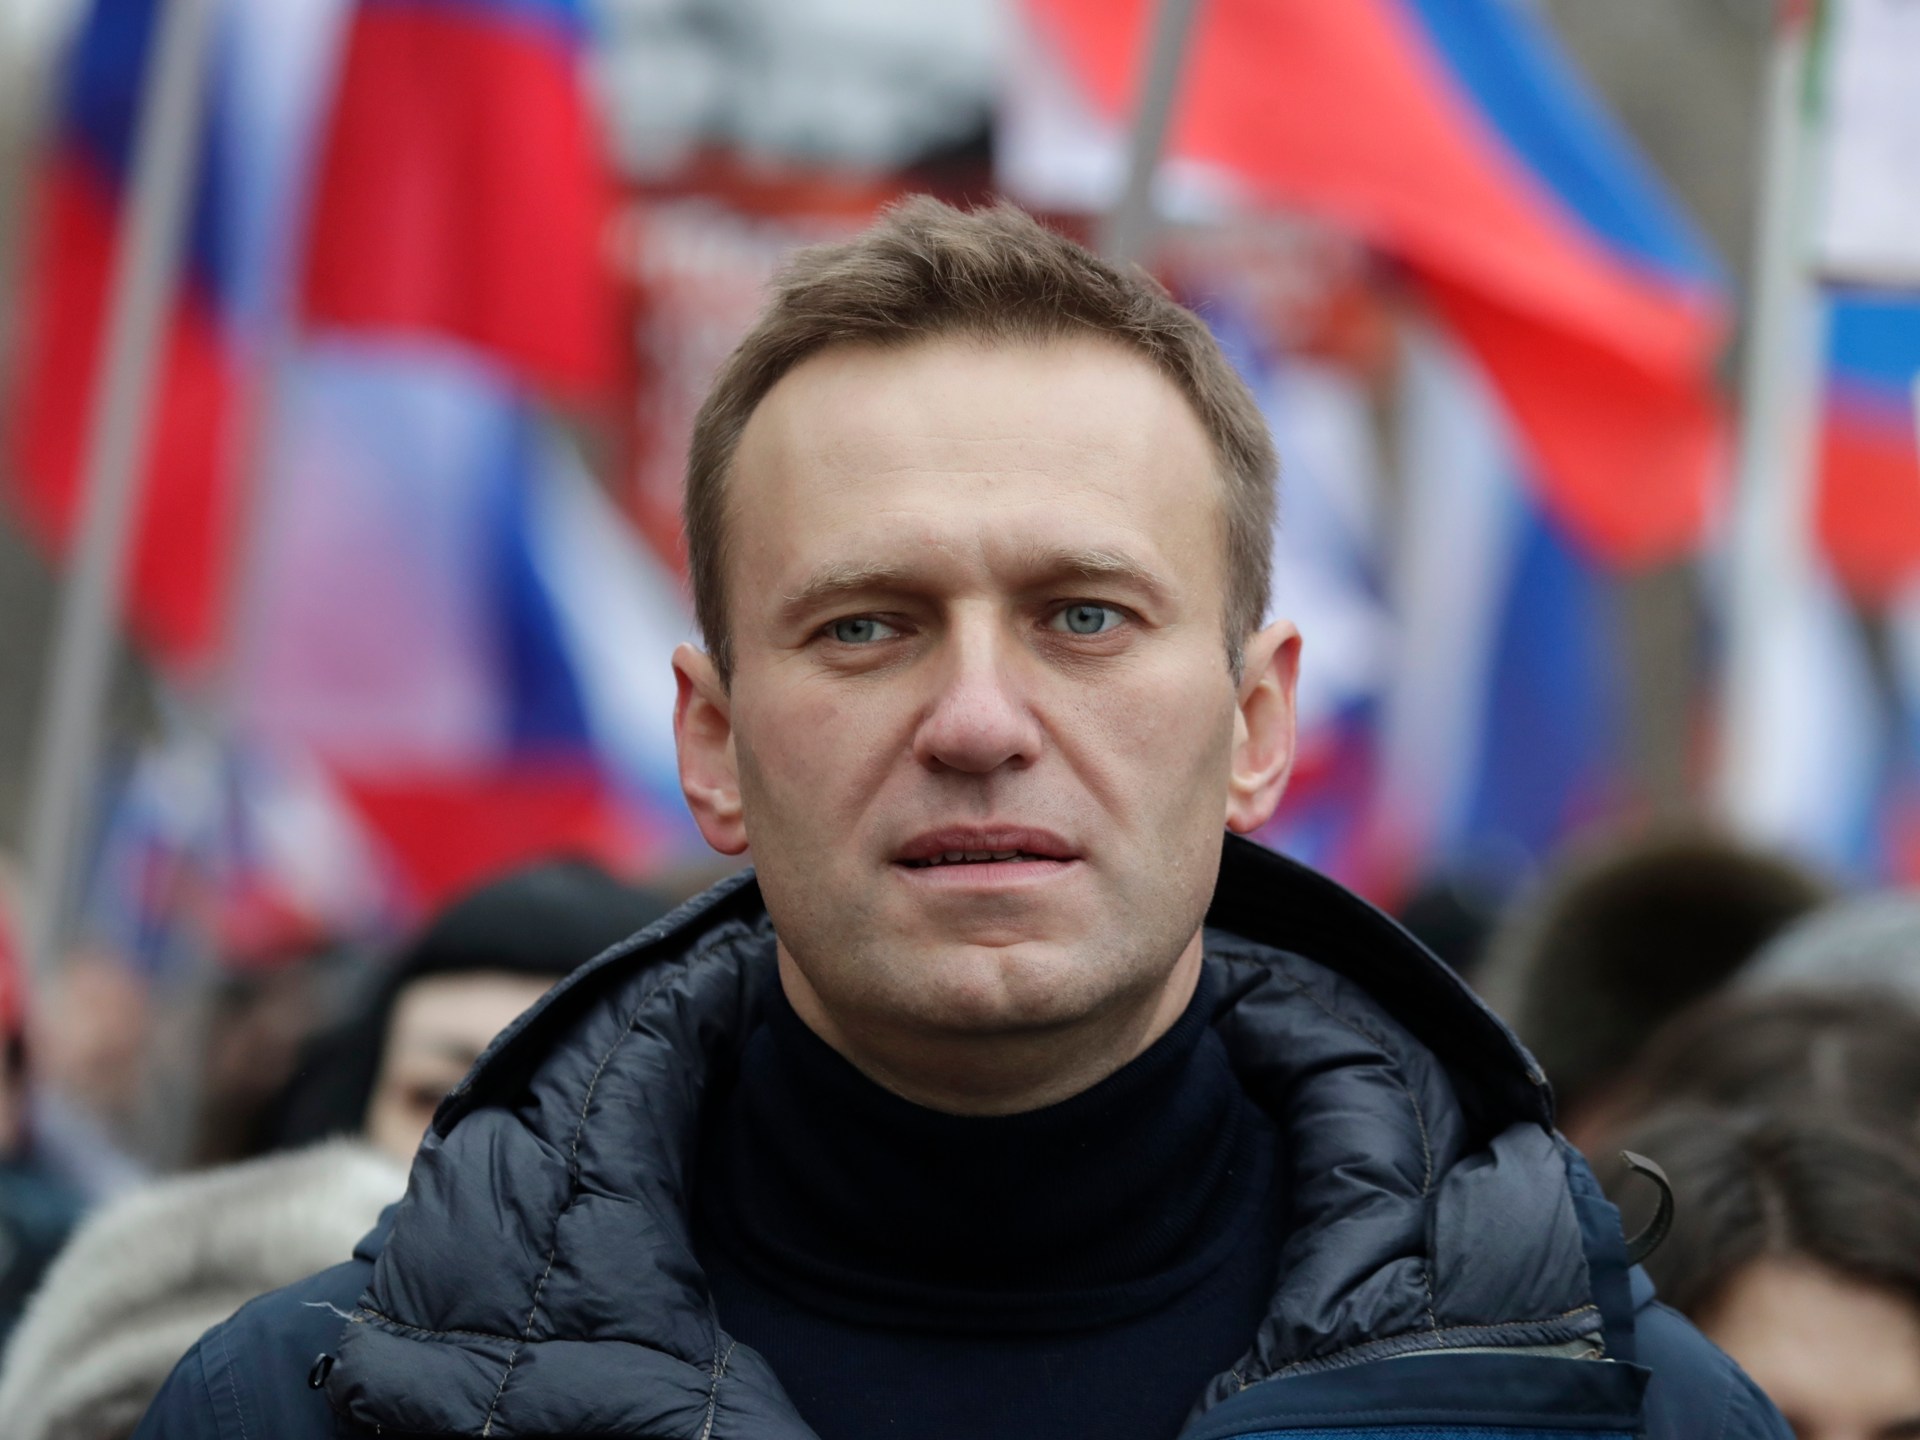 Russia opposition leader Alexey Navalny’s memoir to be published in October | Politics News